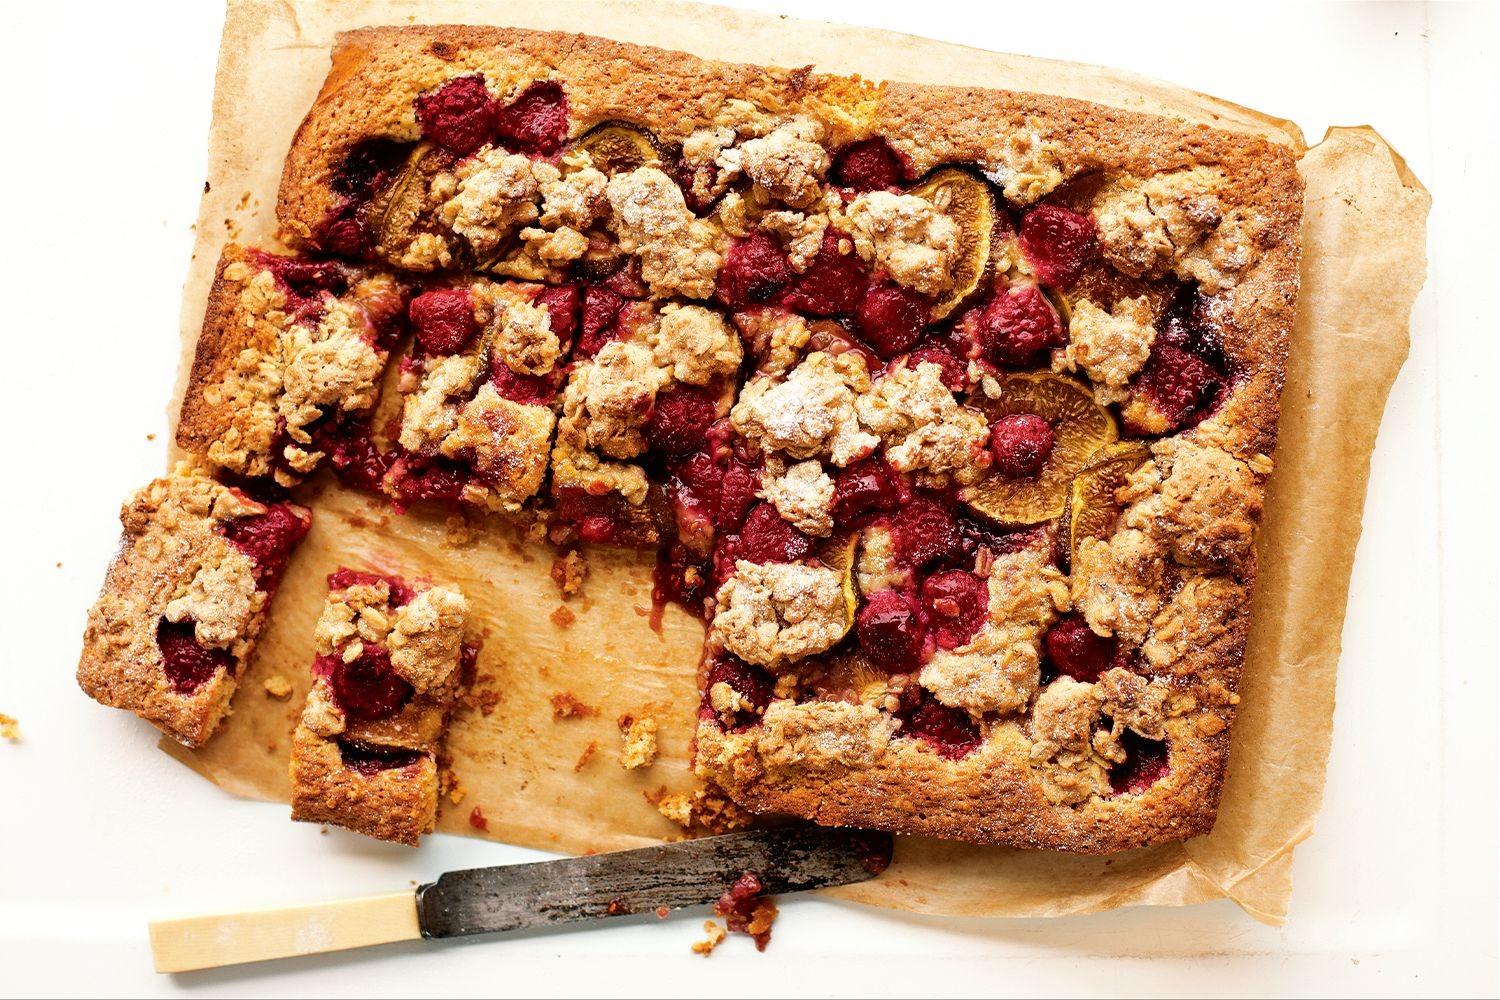 https://img.delicious.com.au/GeZgVBls/del/2016/04/fig-and-raspberry-oat-slice-29022-1.jpg